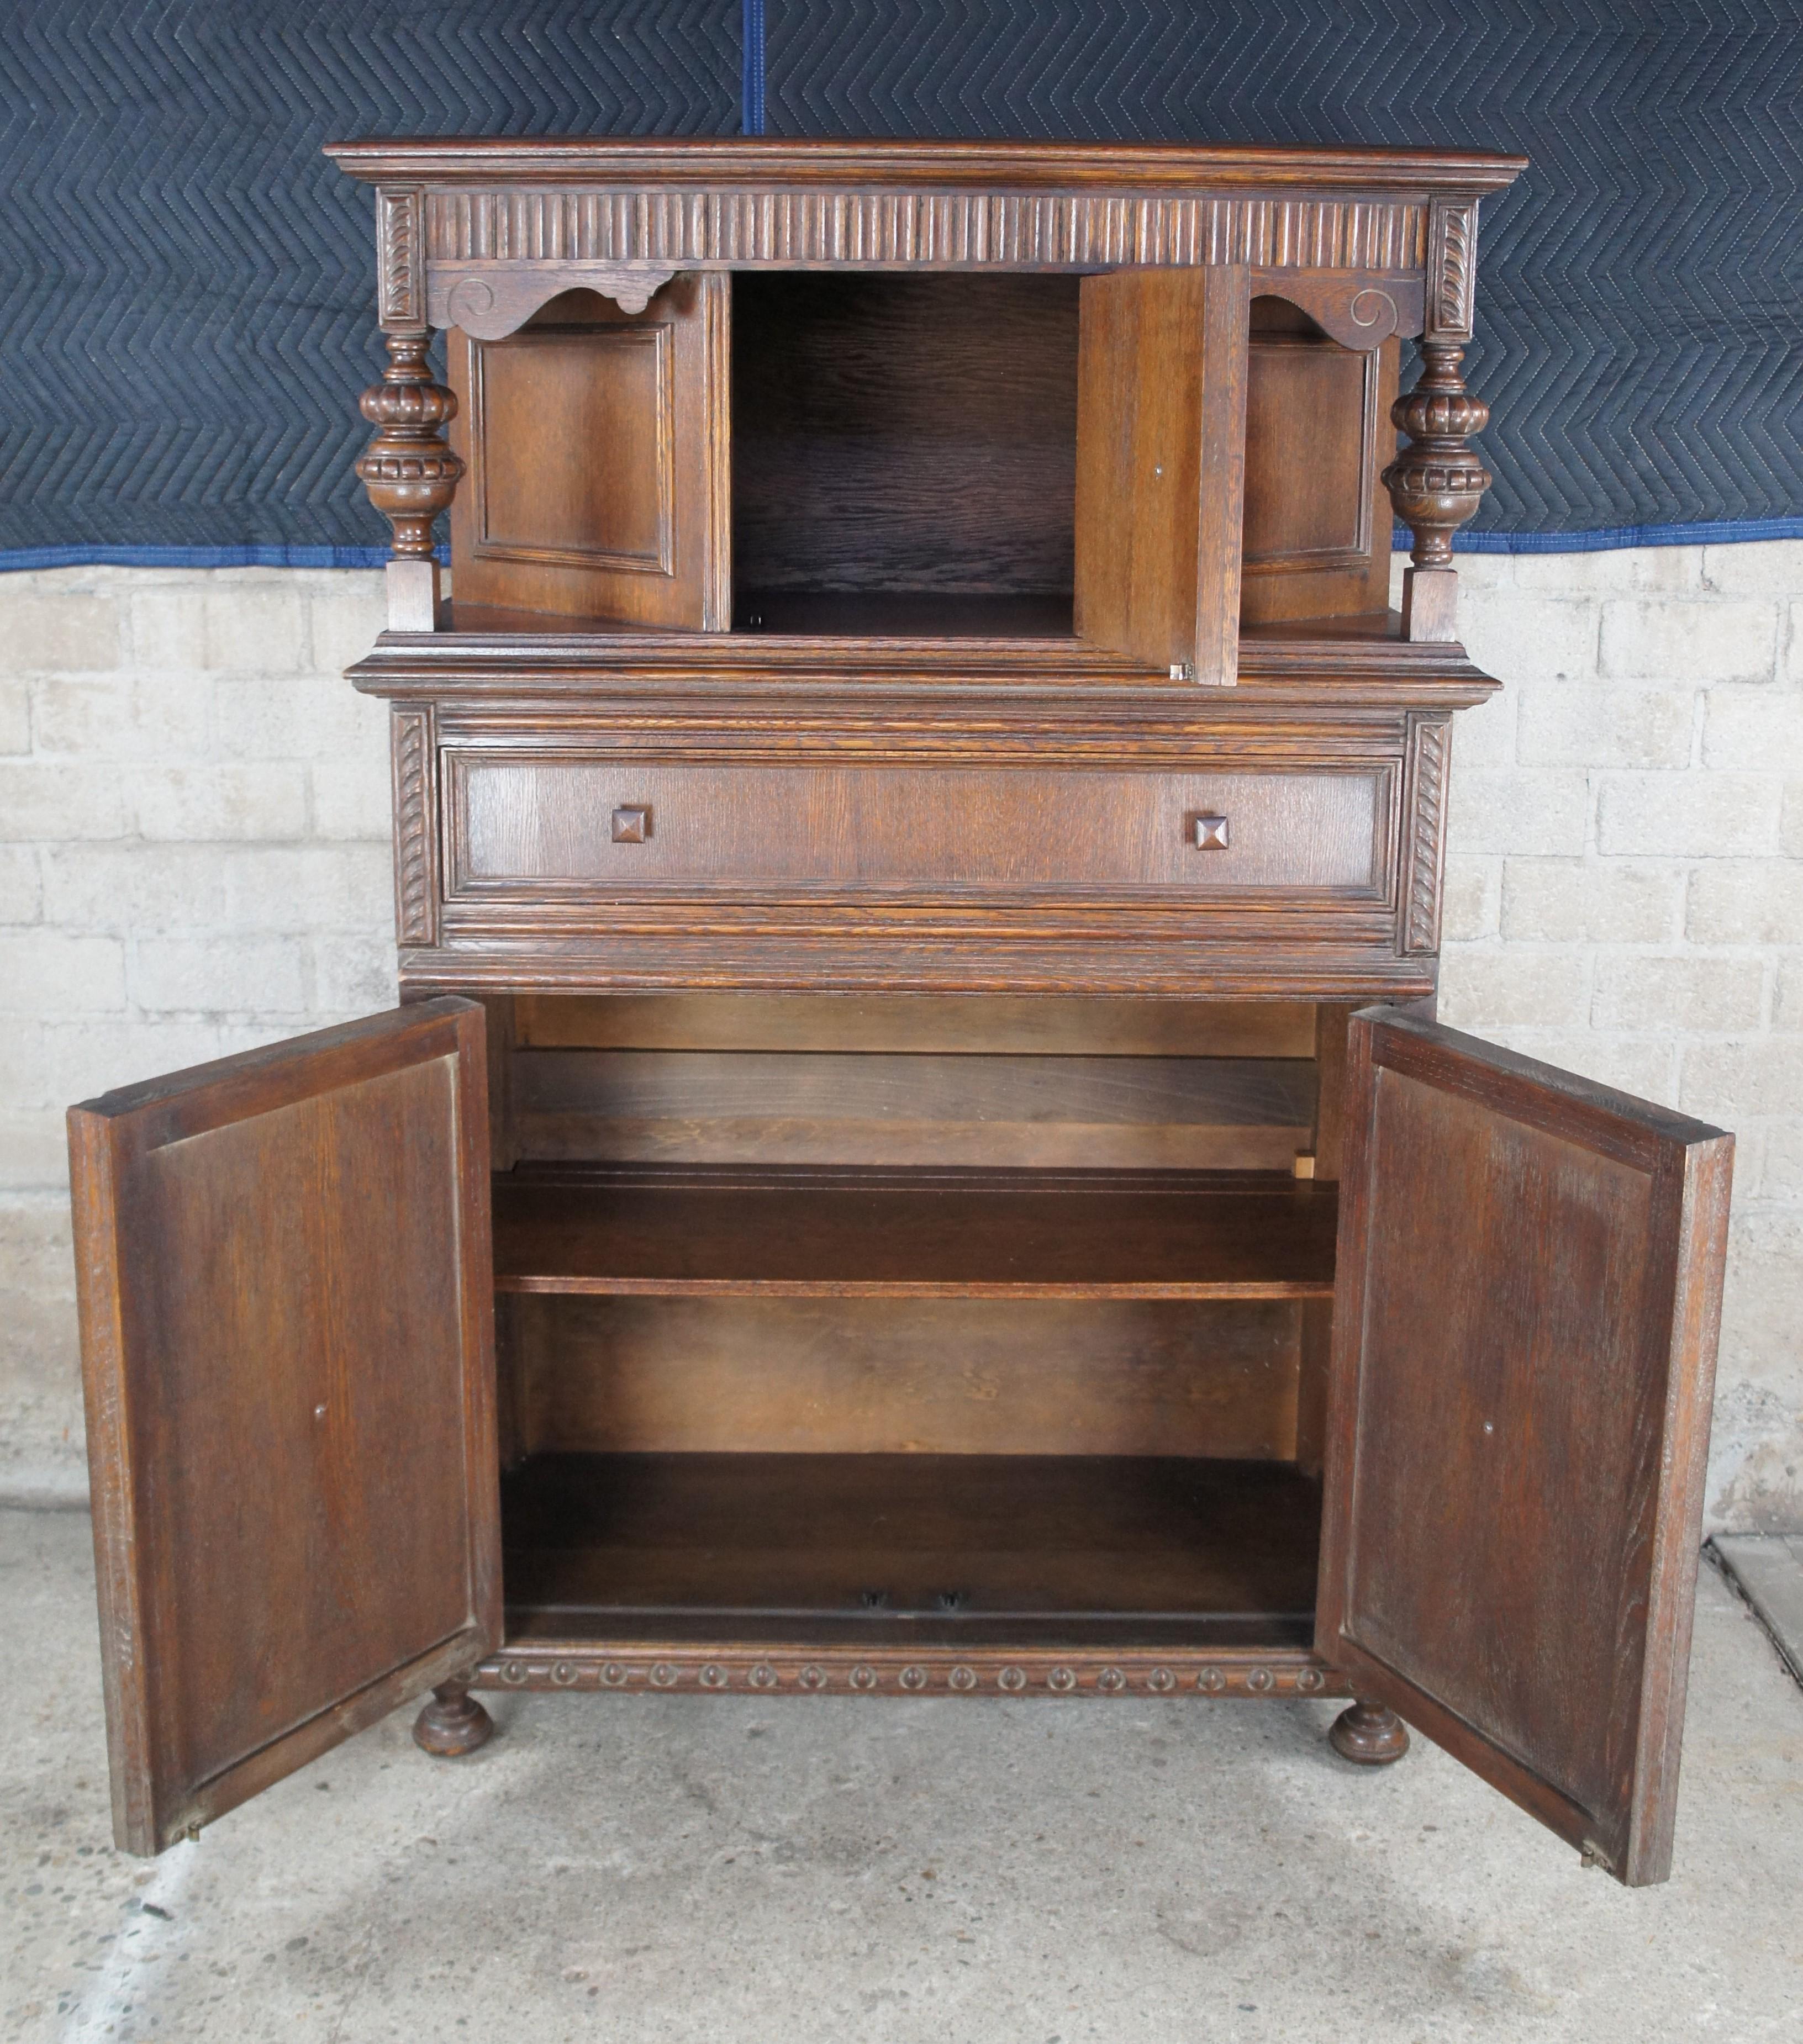 Early 20th Century Antique English Jacobean Style Carved Oak Court Cupboard Hutch Sideboard Dry Bar For Sale